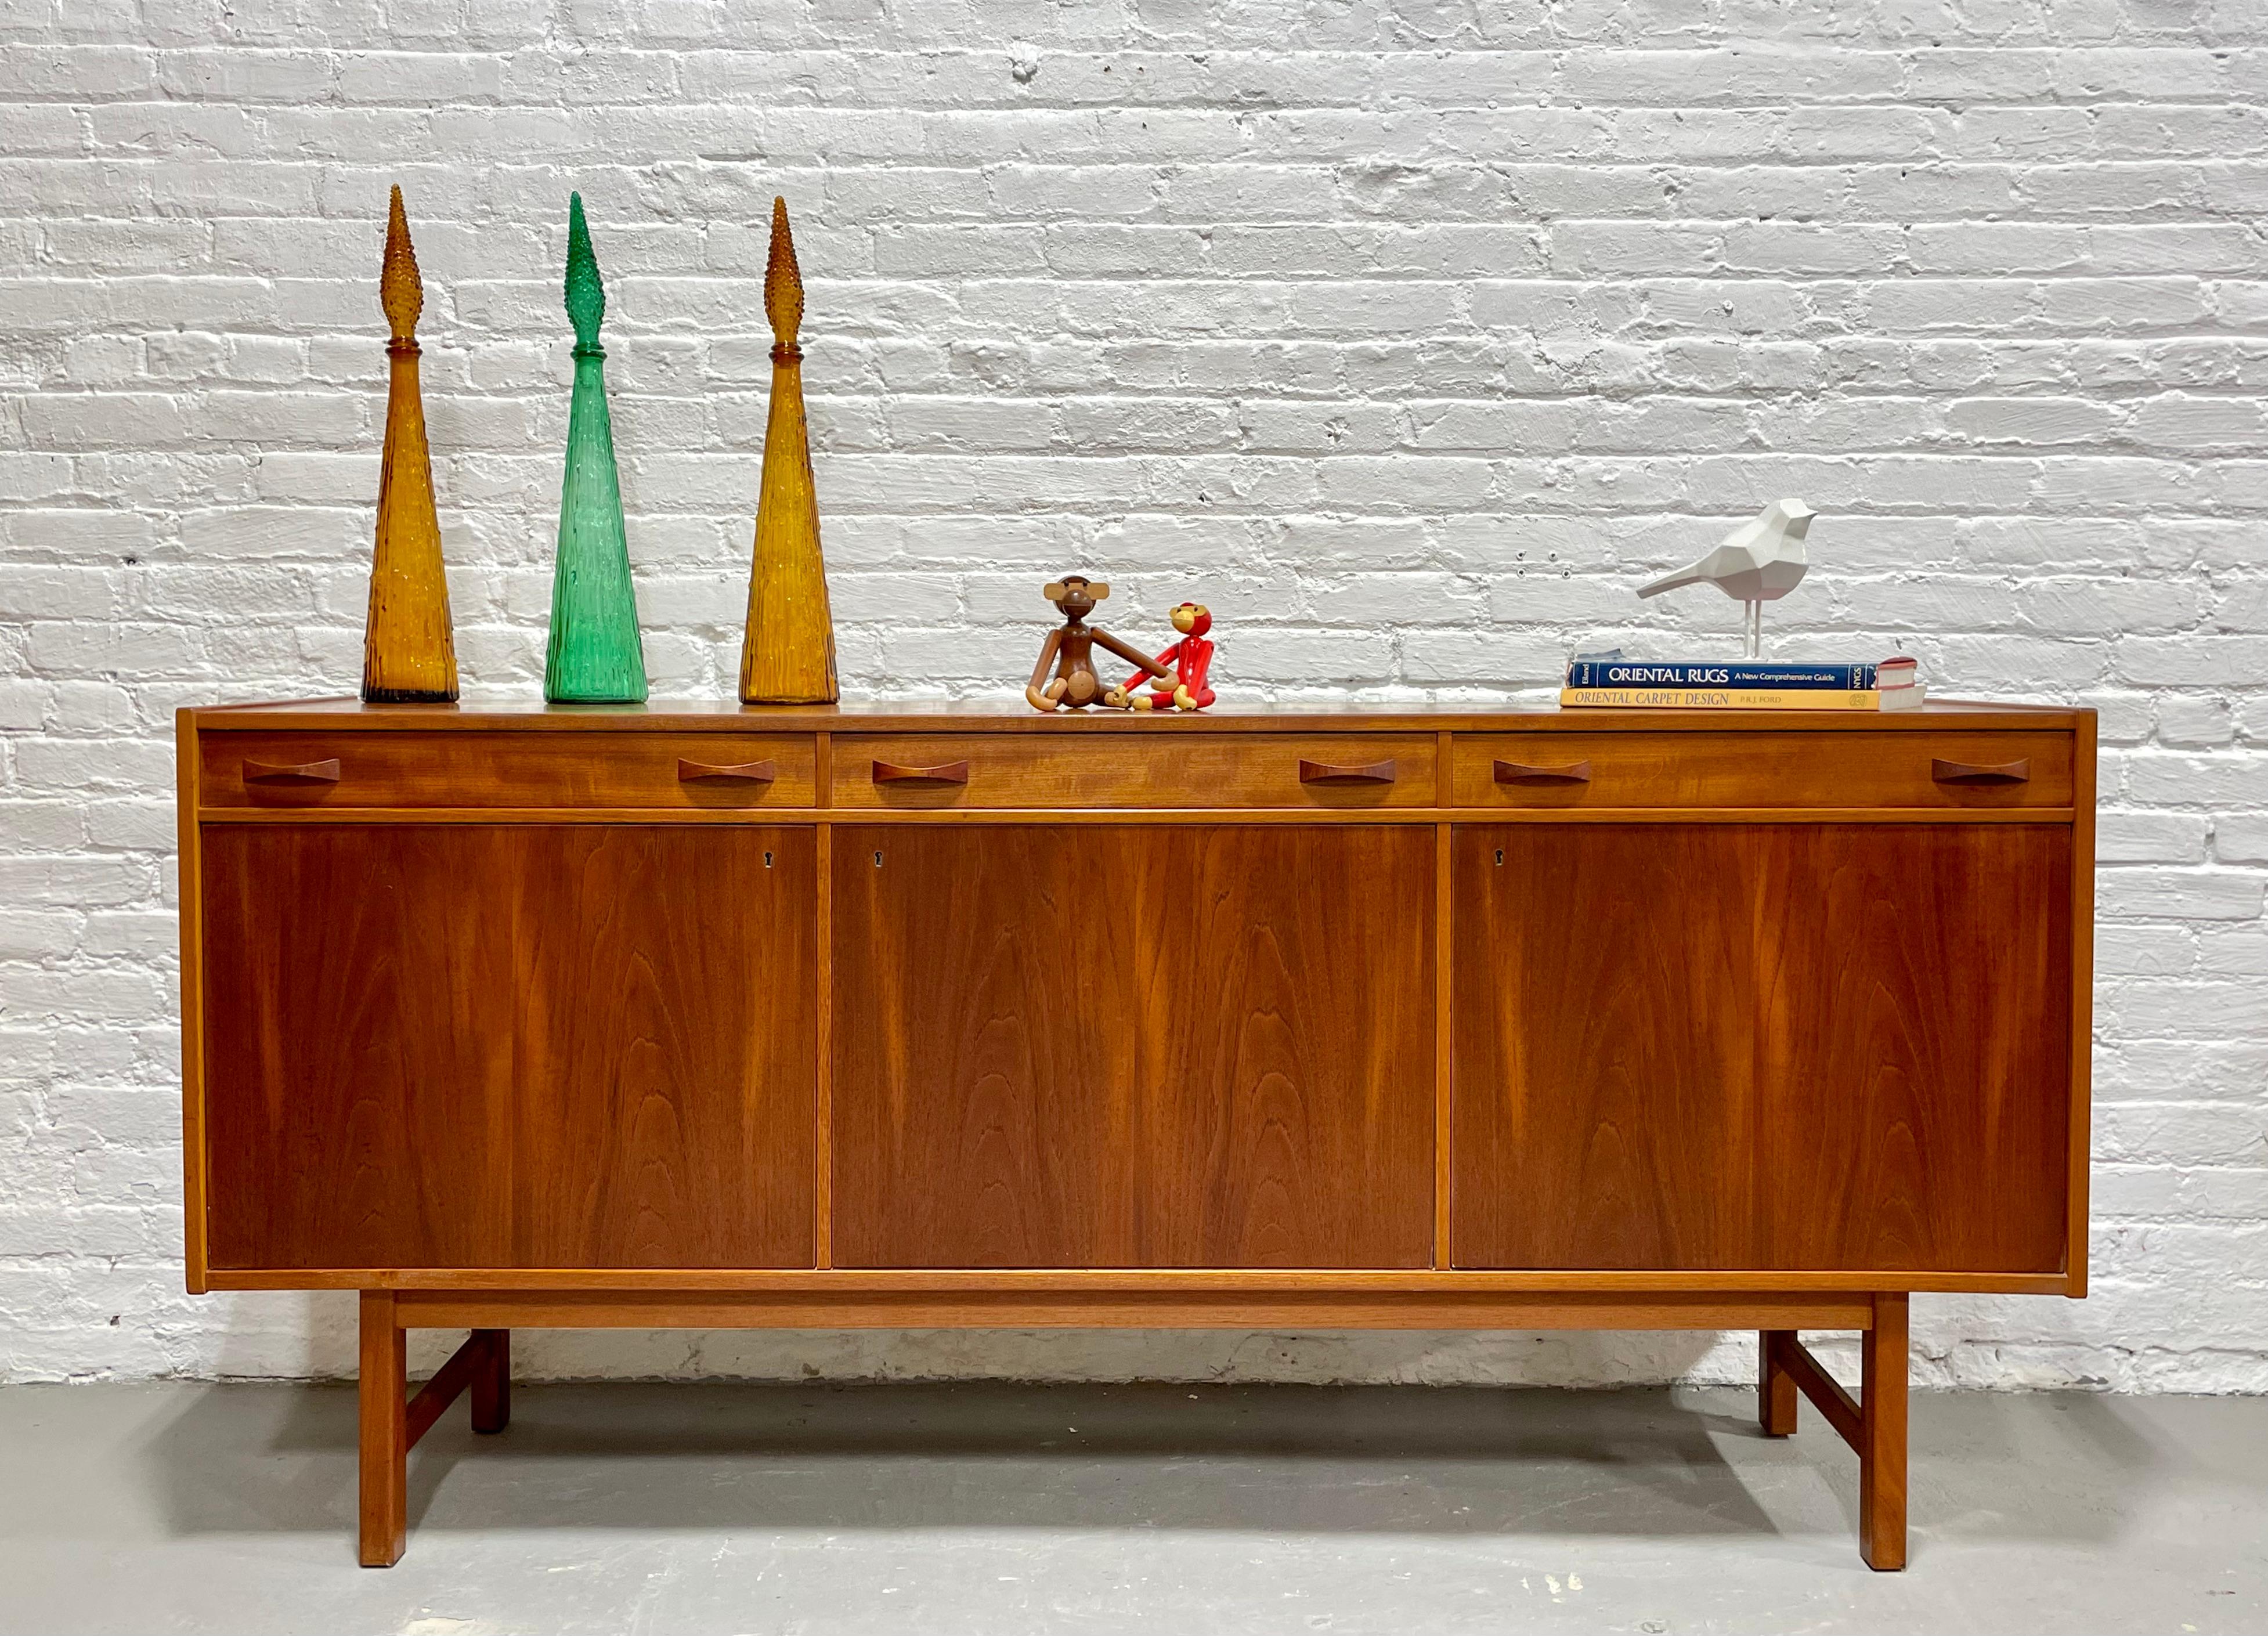 Original 'Ulferts' Swedish Mid Century Modern credenza / media cabinet, designed by Tage Olofsson for Ulferts, Made in Sweden. This stunning piece features 3 dovetailed drawers (one of which is felt lined) and the three lower areas offer a wealth of